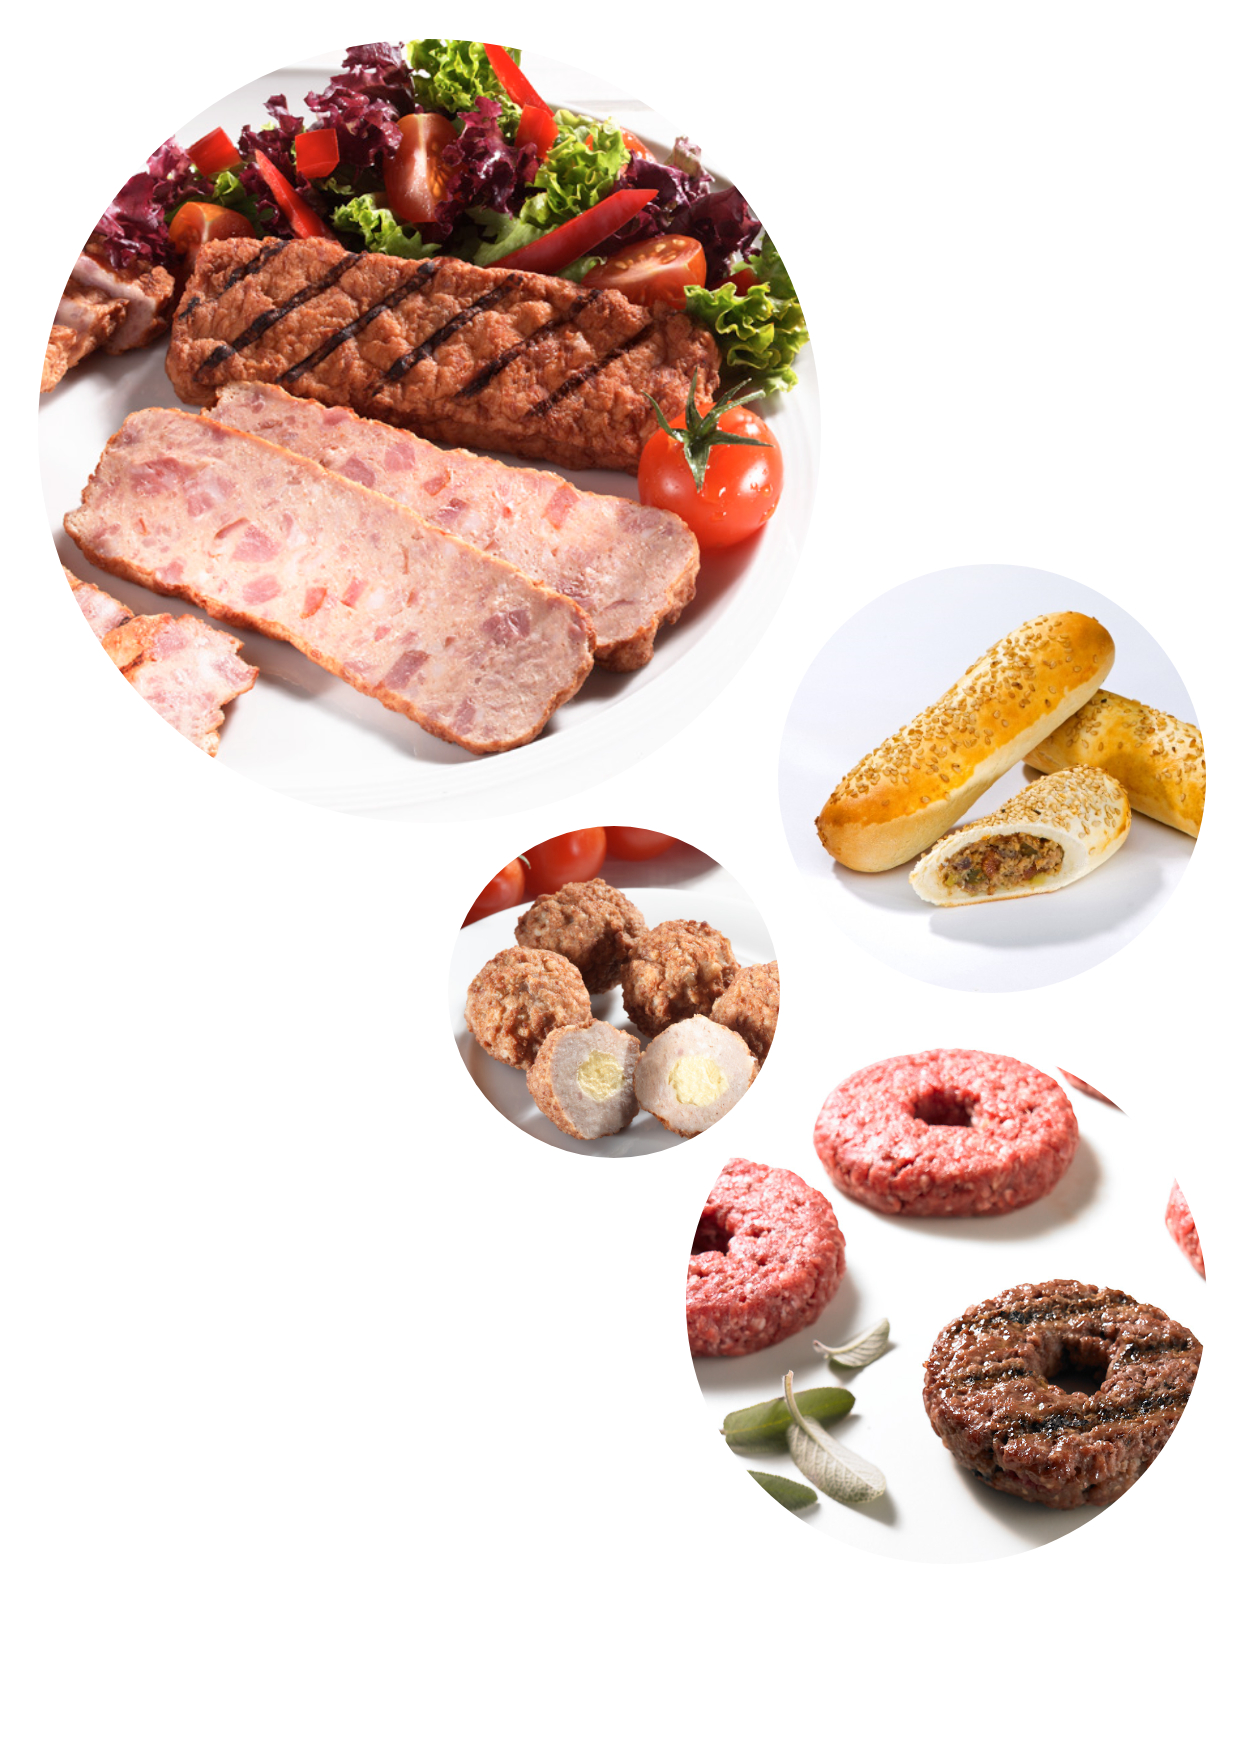 Ground Meat, Filled Bakery Products, Portioned Meat